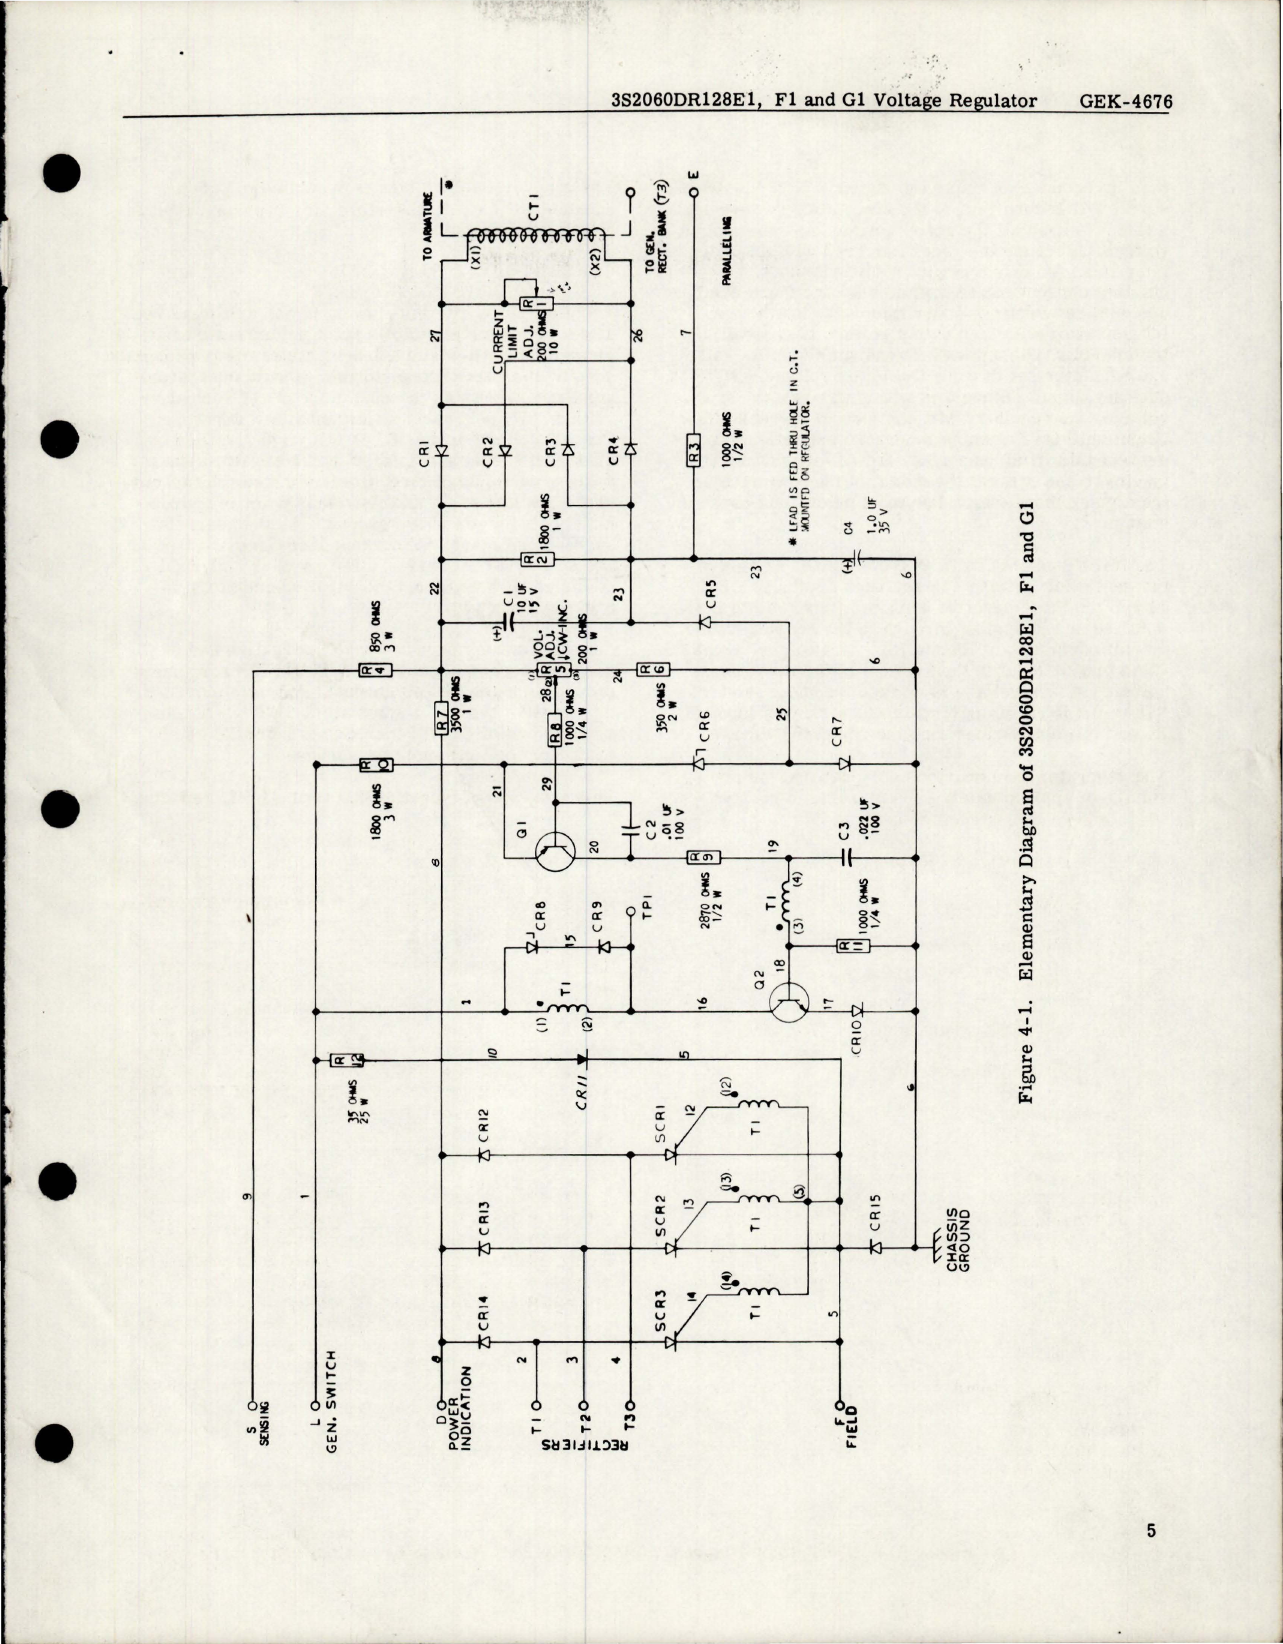 Sample page 5 from AirCorps Library document: Test Instructions for Voltage Regulator - Model 3S2060DR128E1, F1 and G1 